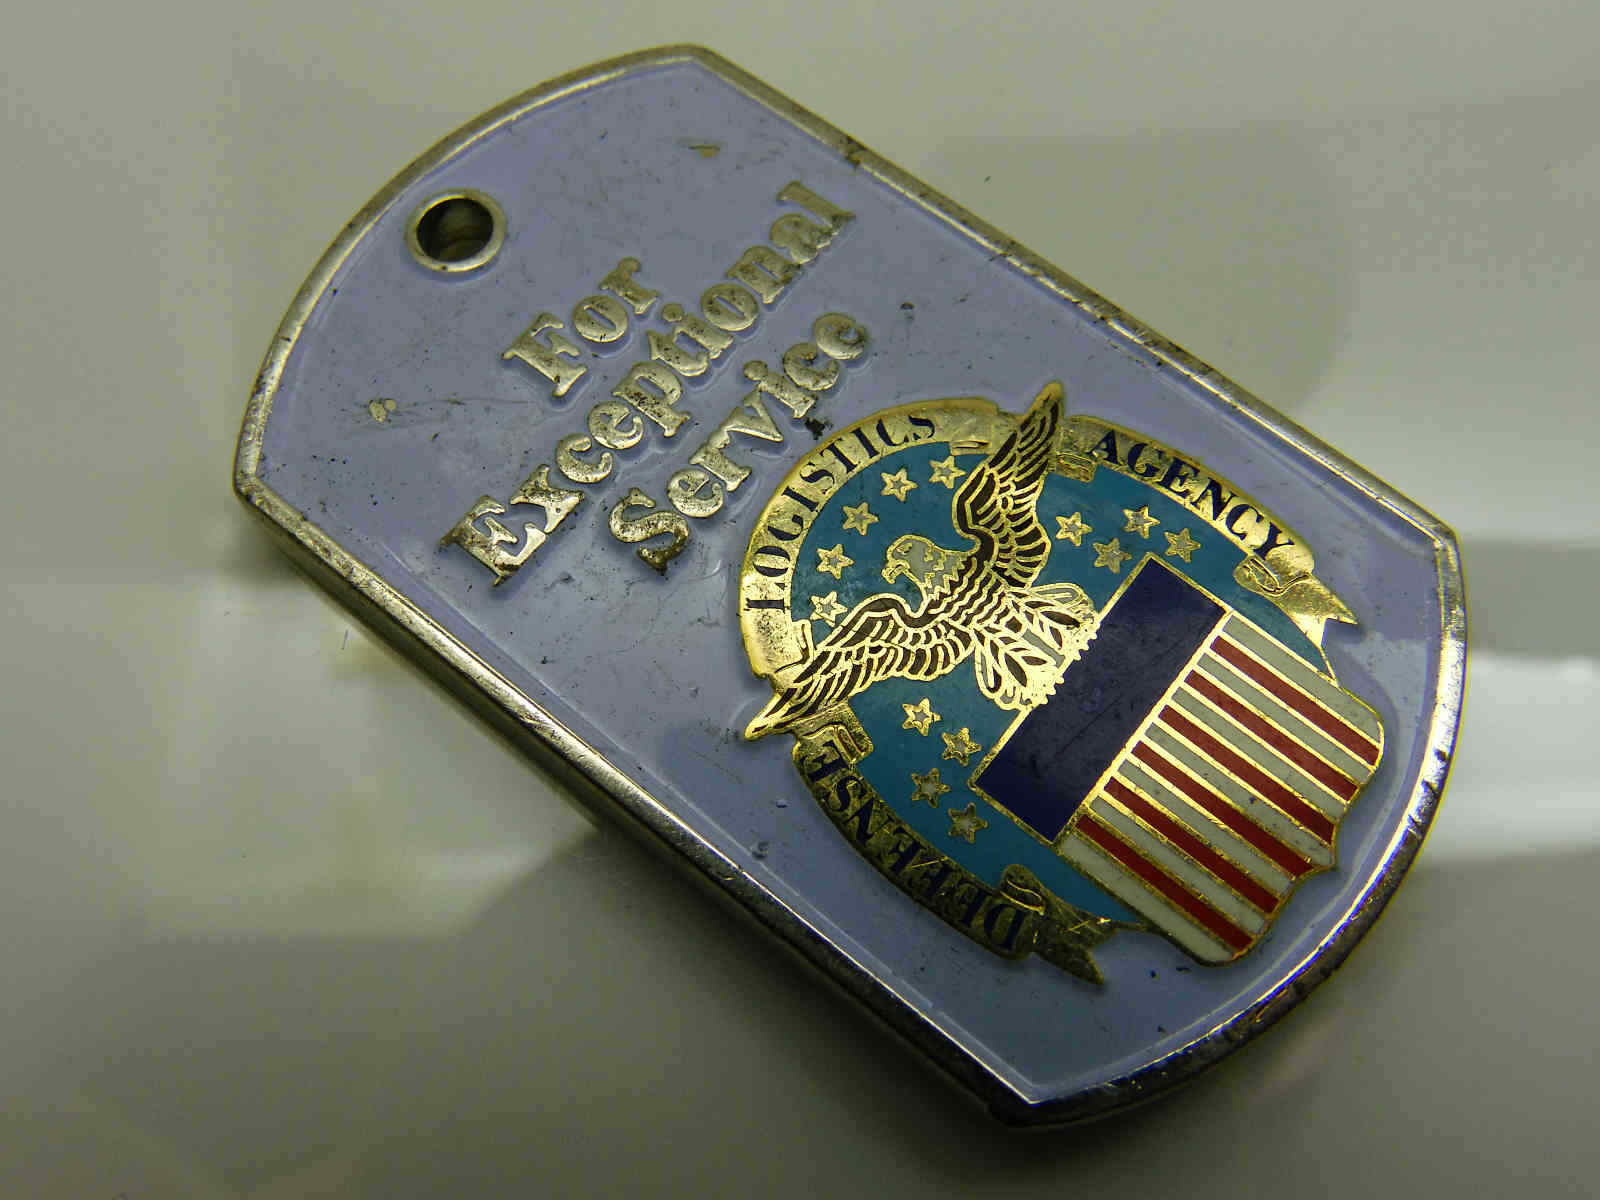 U.S. DEFENSE LOGISTCS AGENCY CHALLENGE COIN